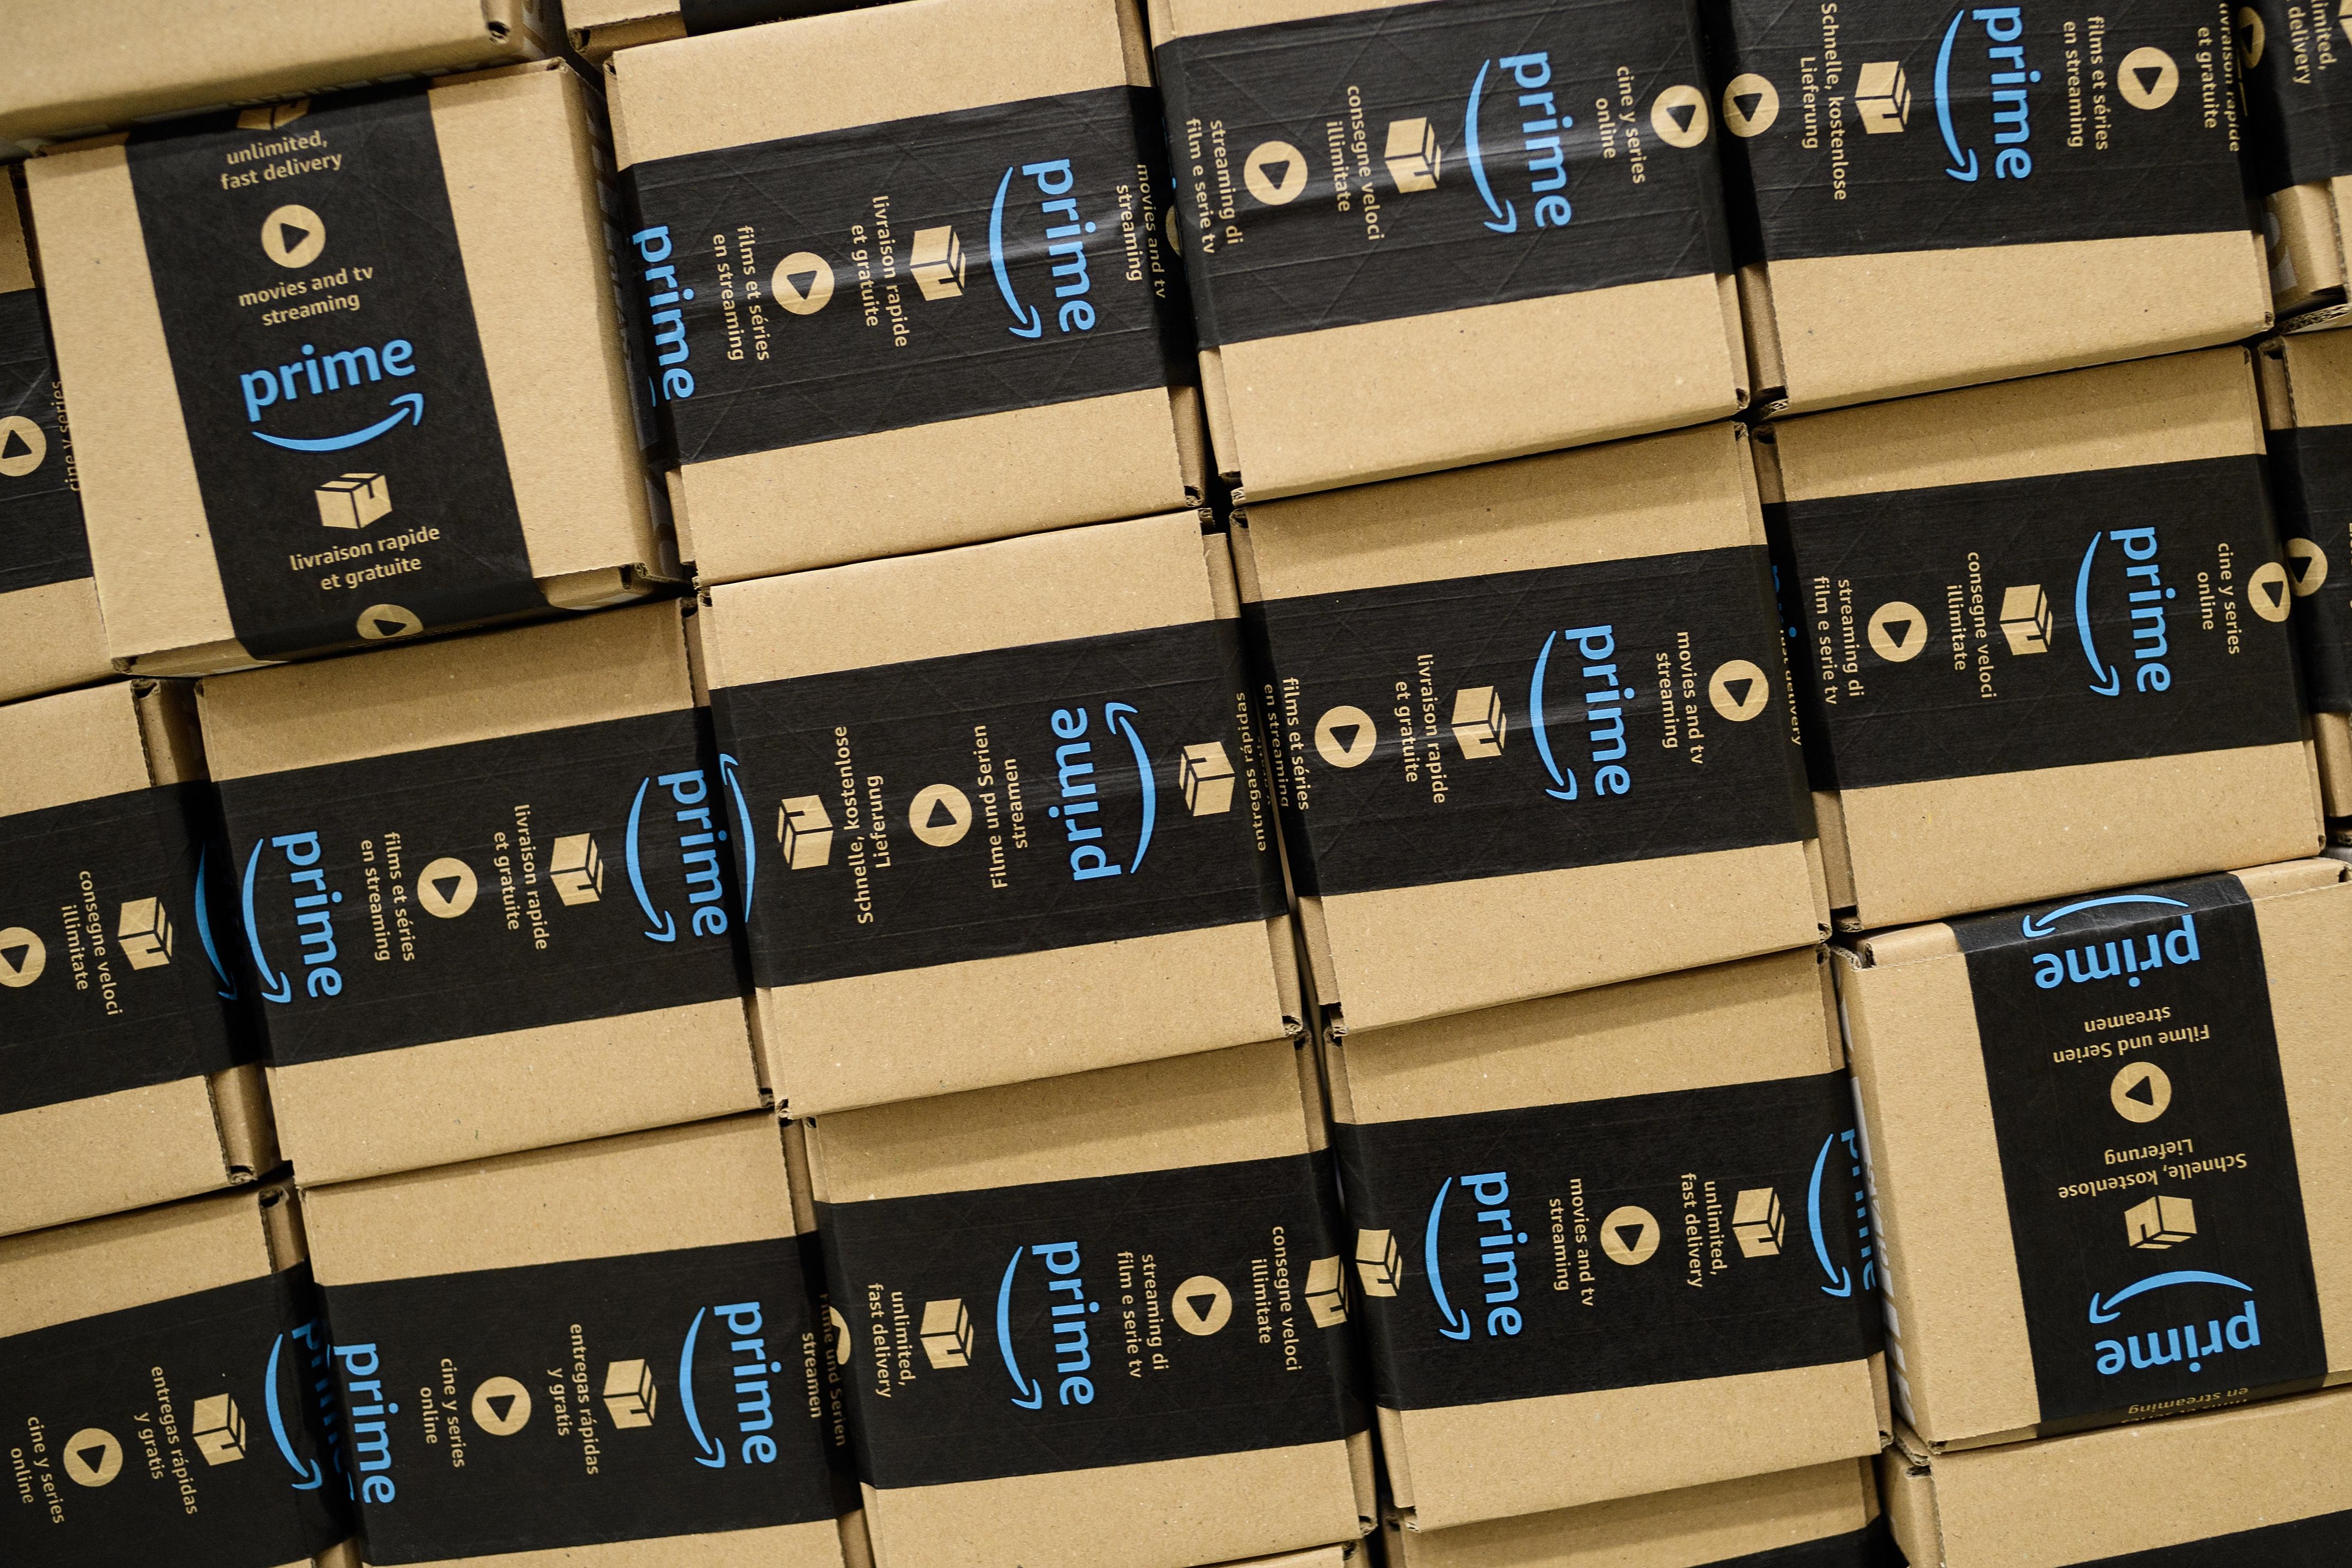 A close-up of a packaged Amazon Prime item in the Amazon Fulfilment centre.